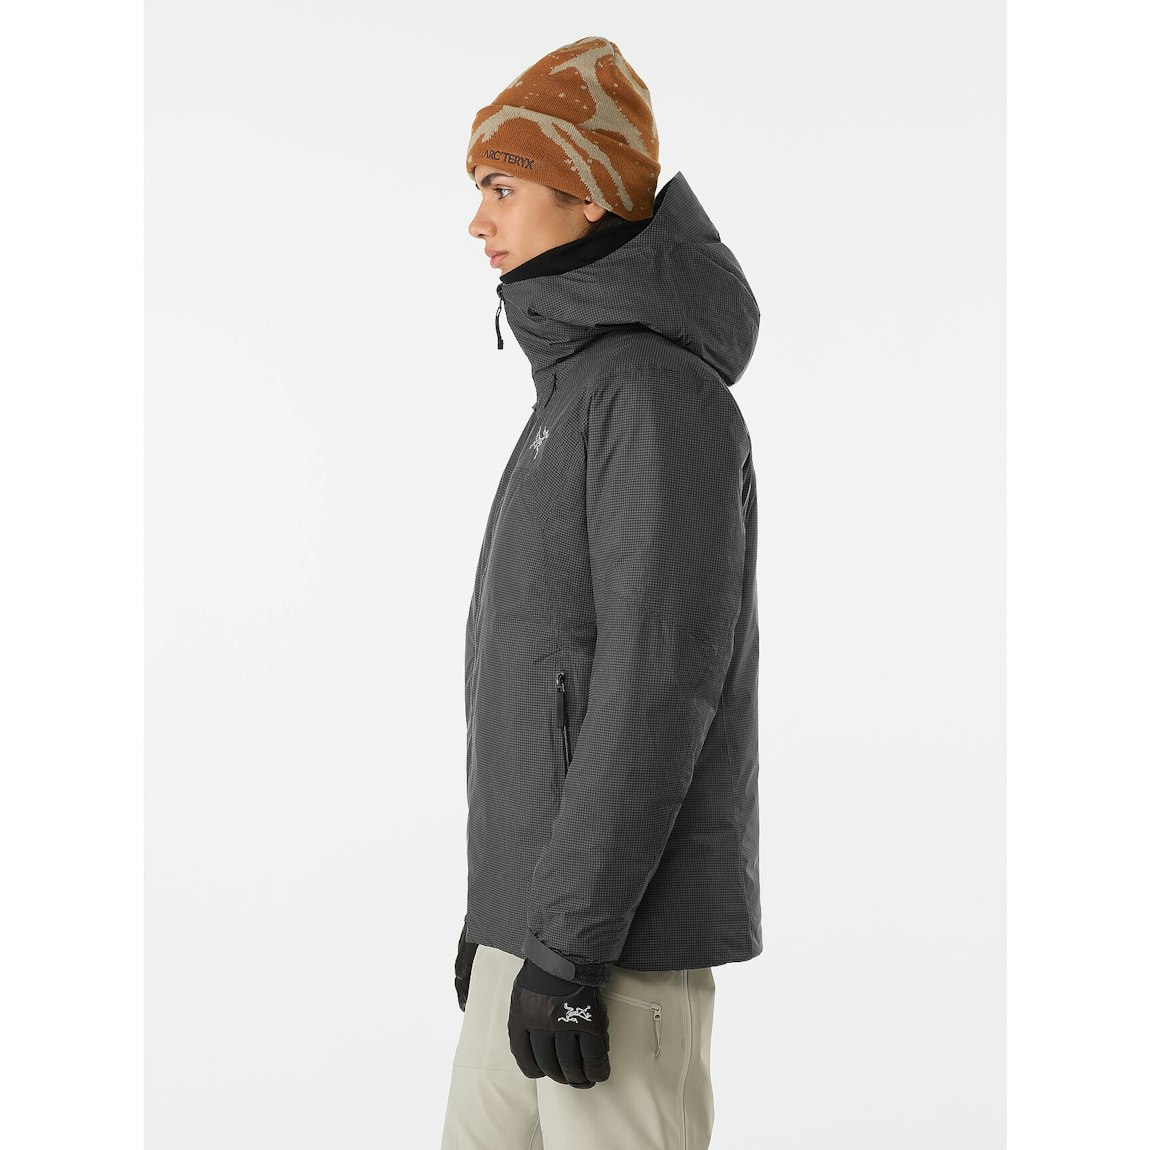 Rush Insulated Jacket Women's | Arc'teryx Outlet